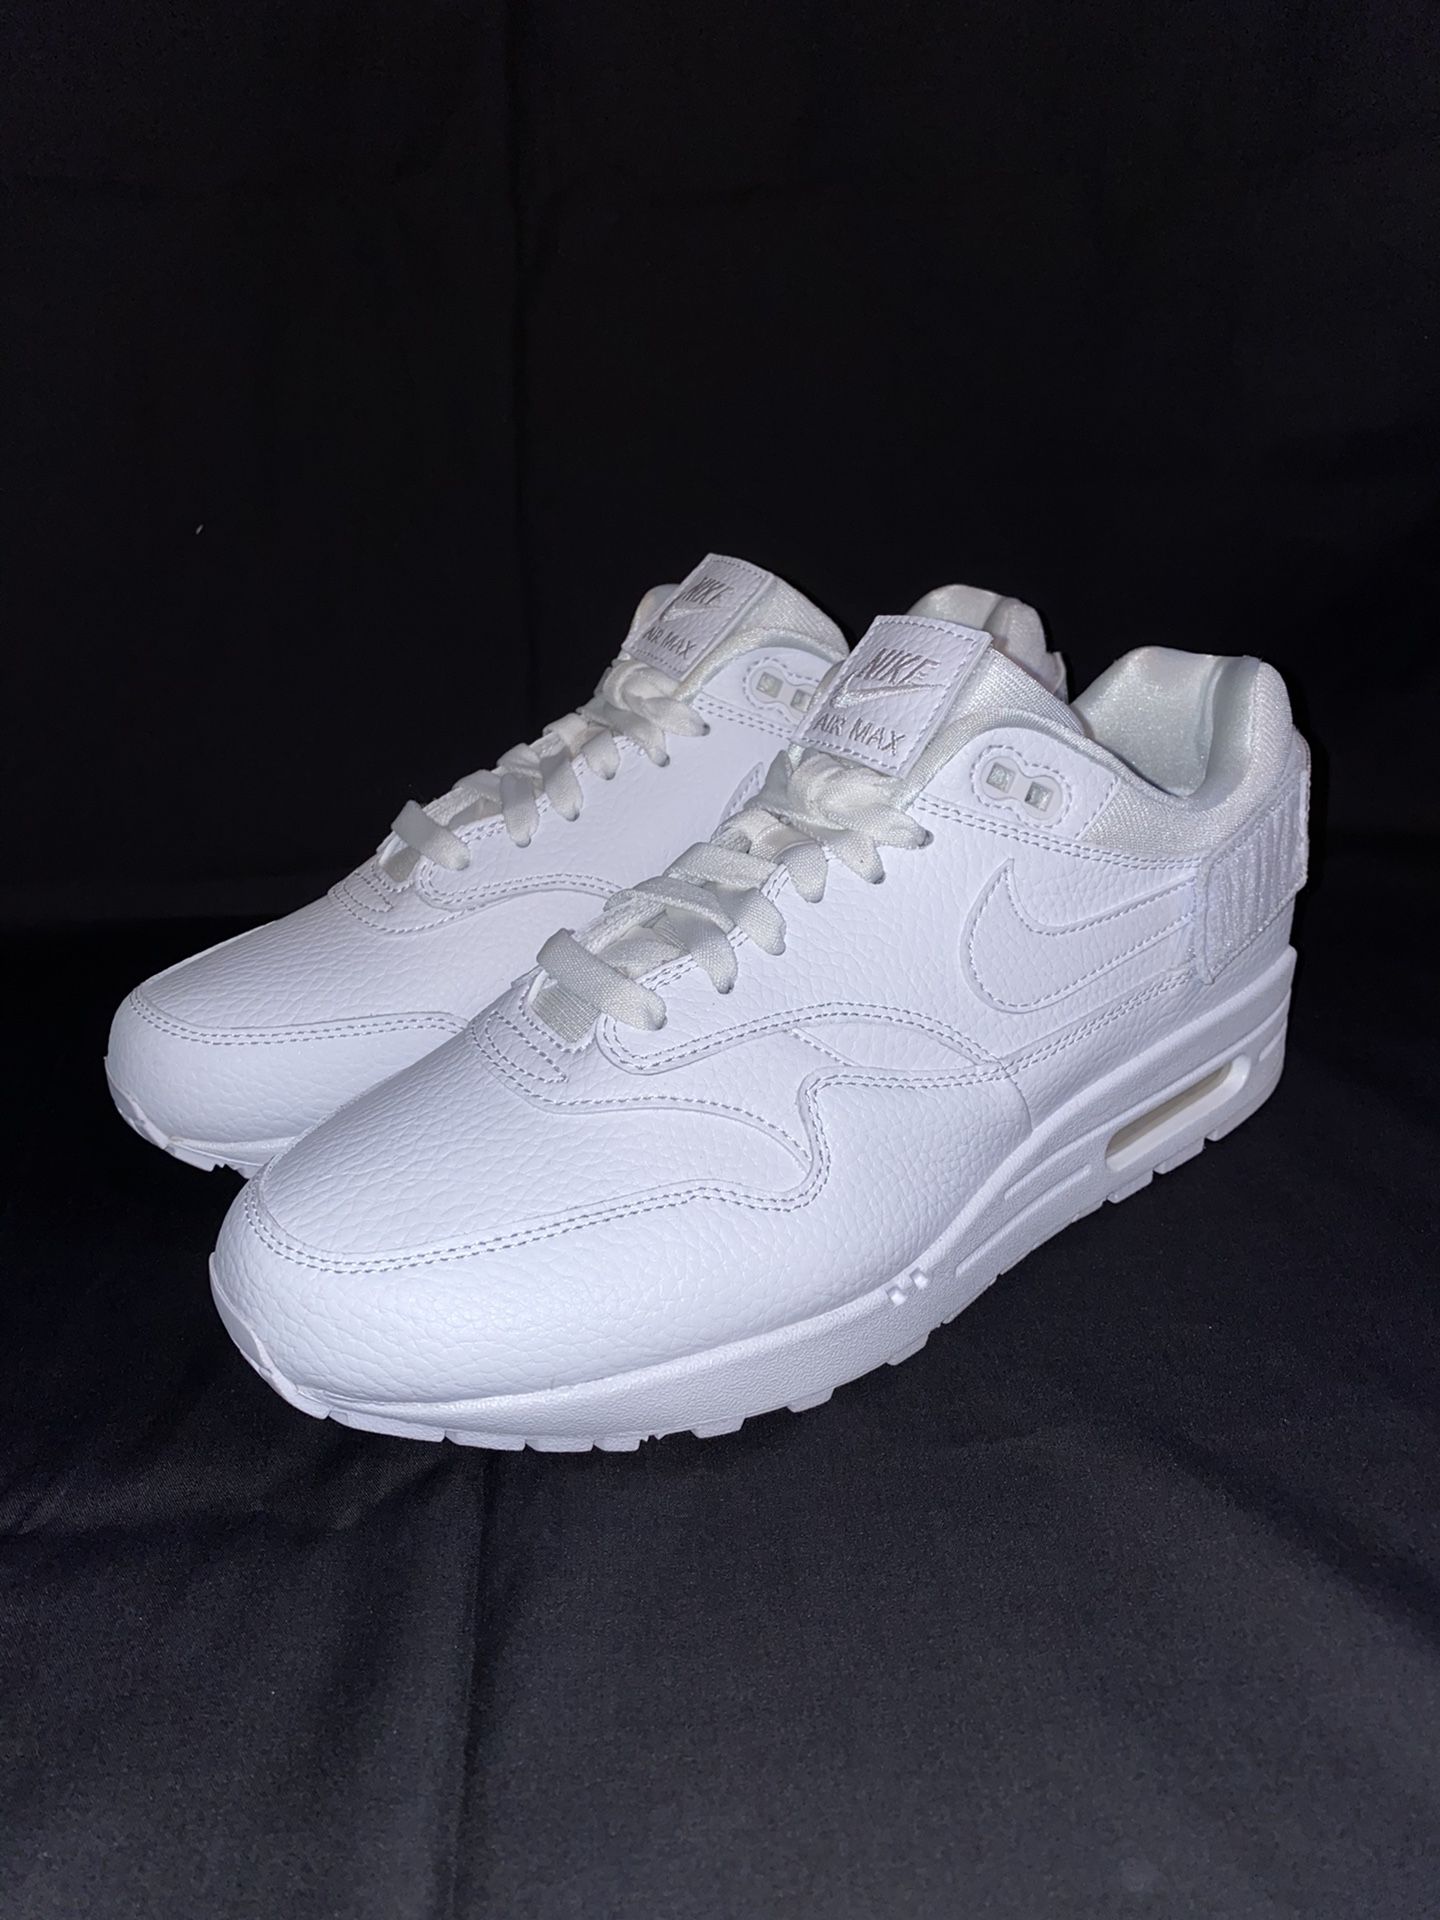 Womens Nike Air Max 1-100 Triple White Patches Leather Shoes AQ7826-100 Size 10